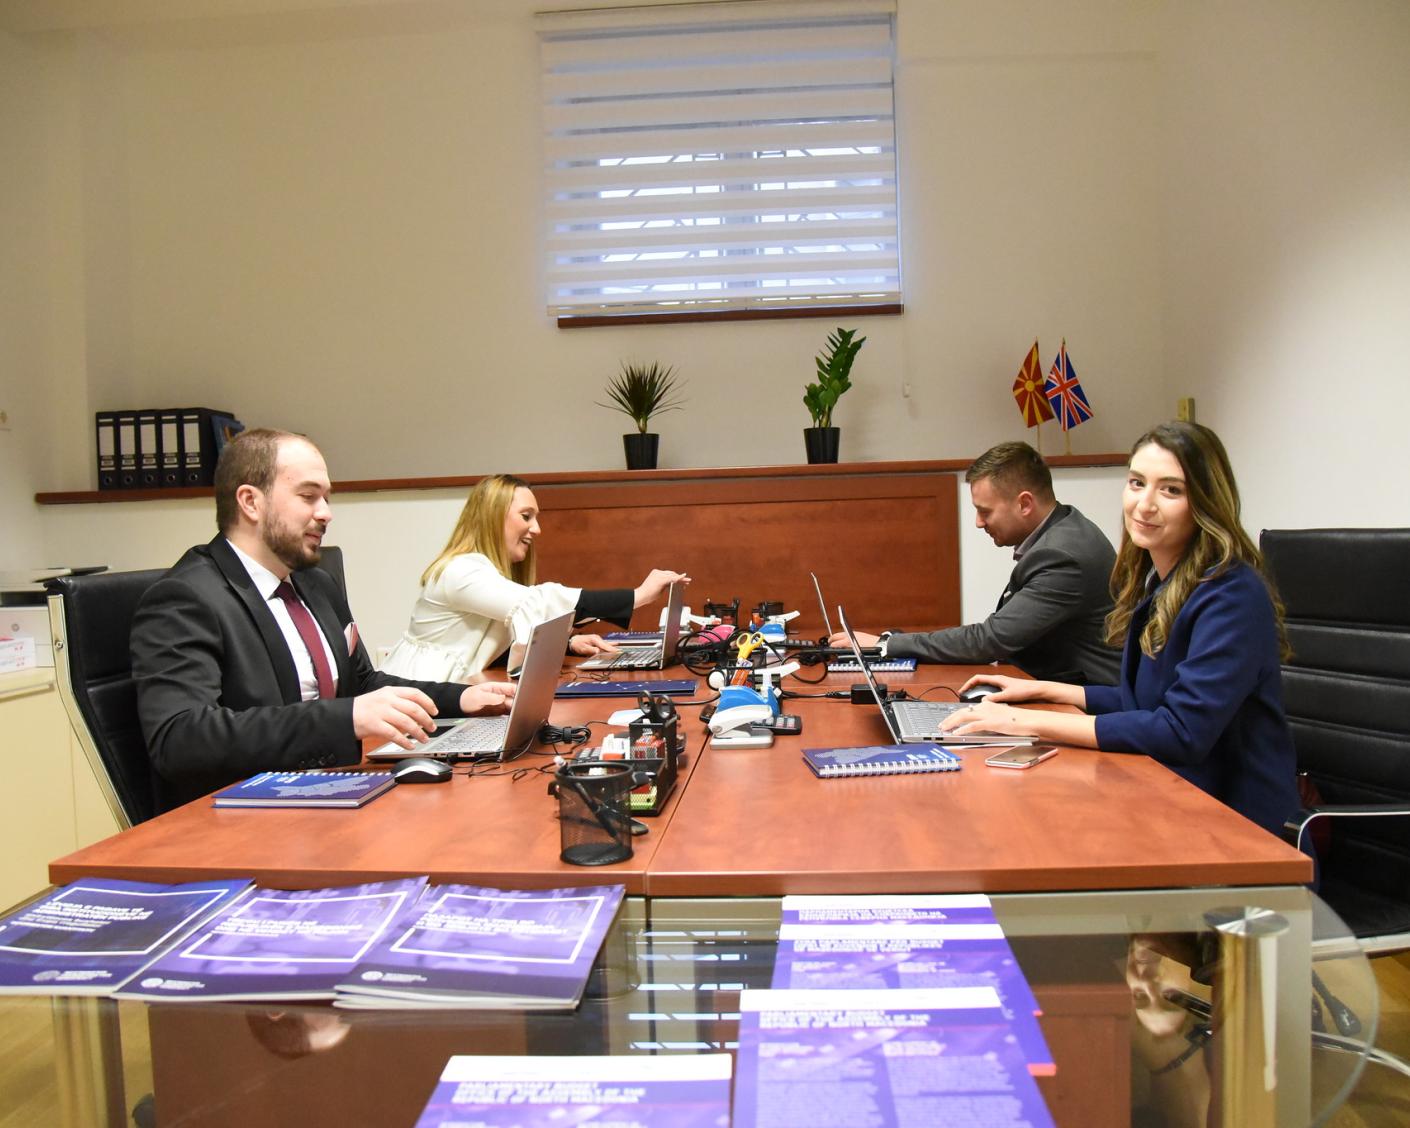 Parliamentary budget office staff in North Macedonia